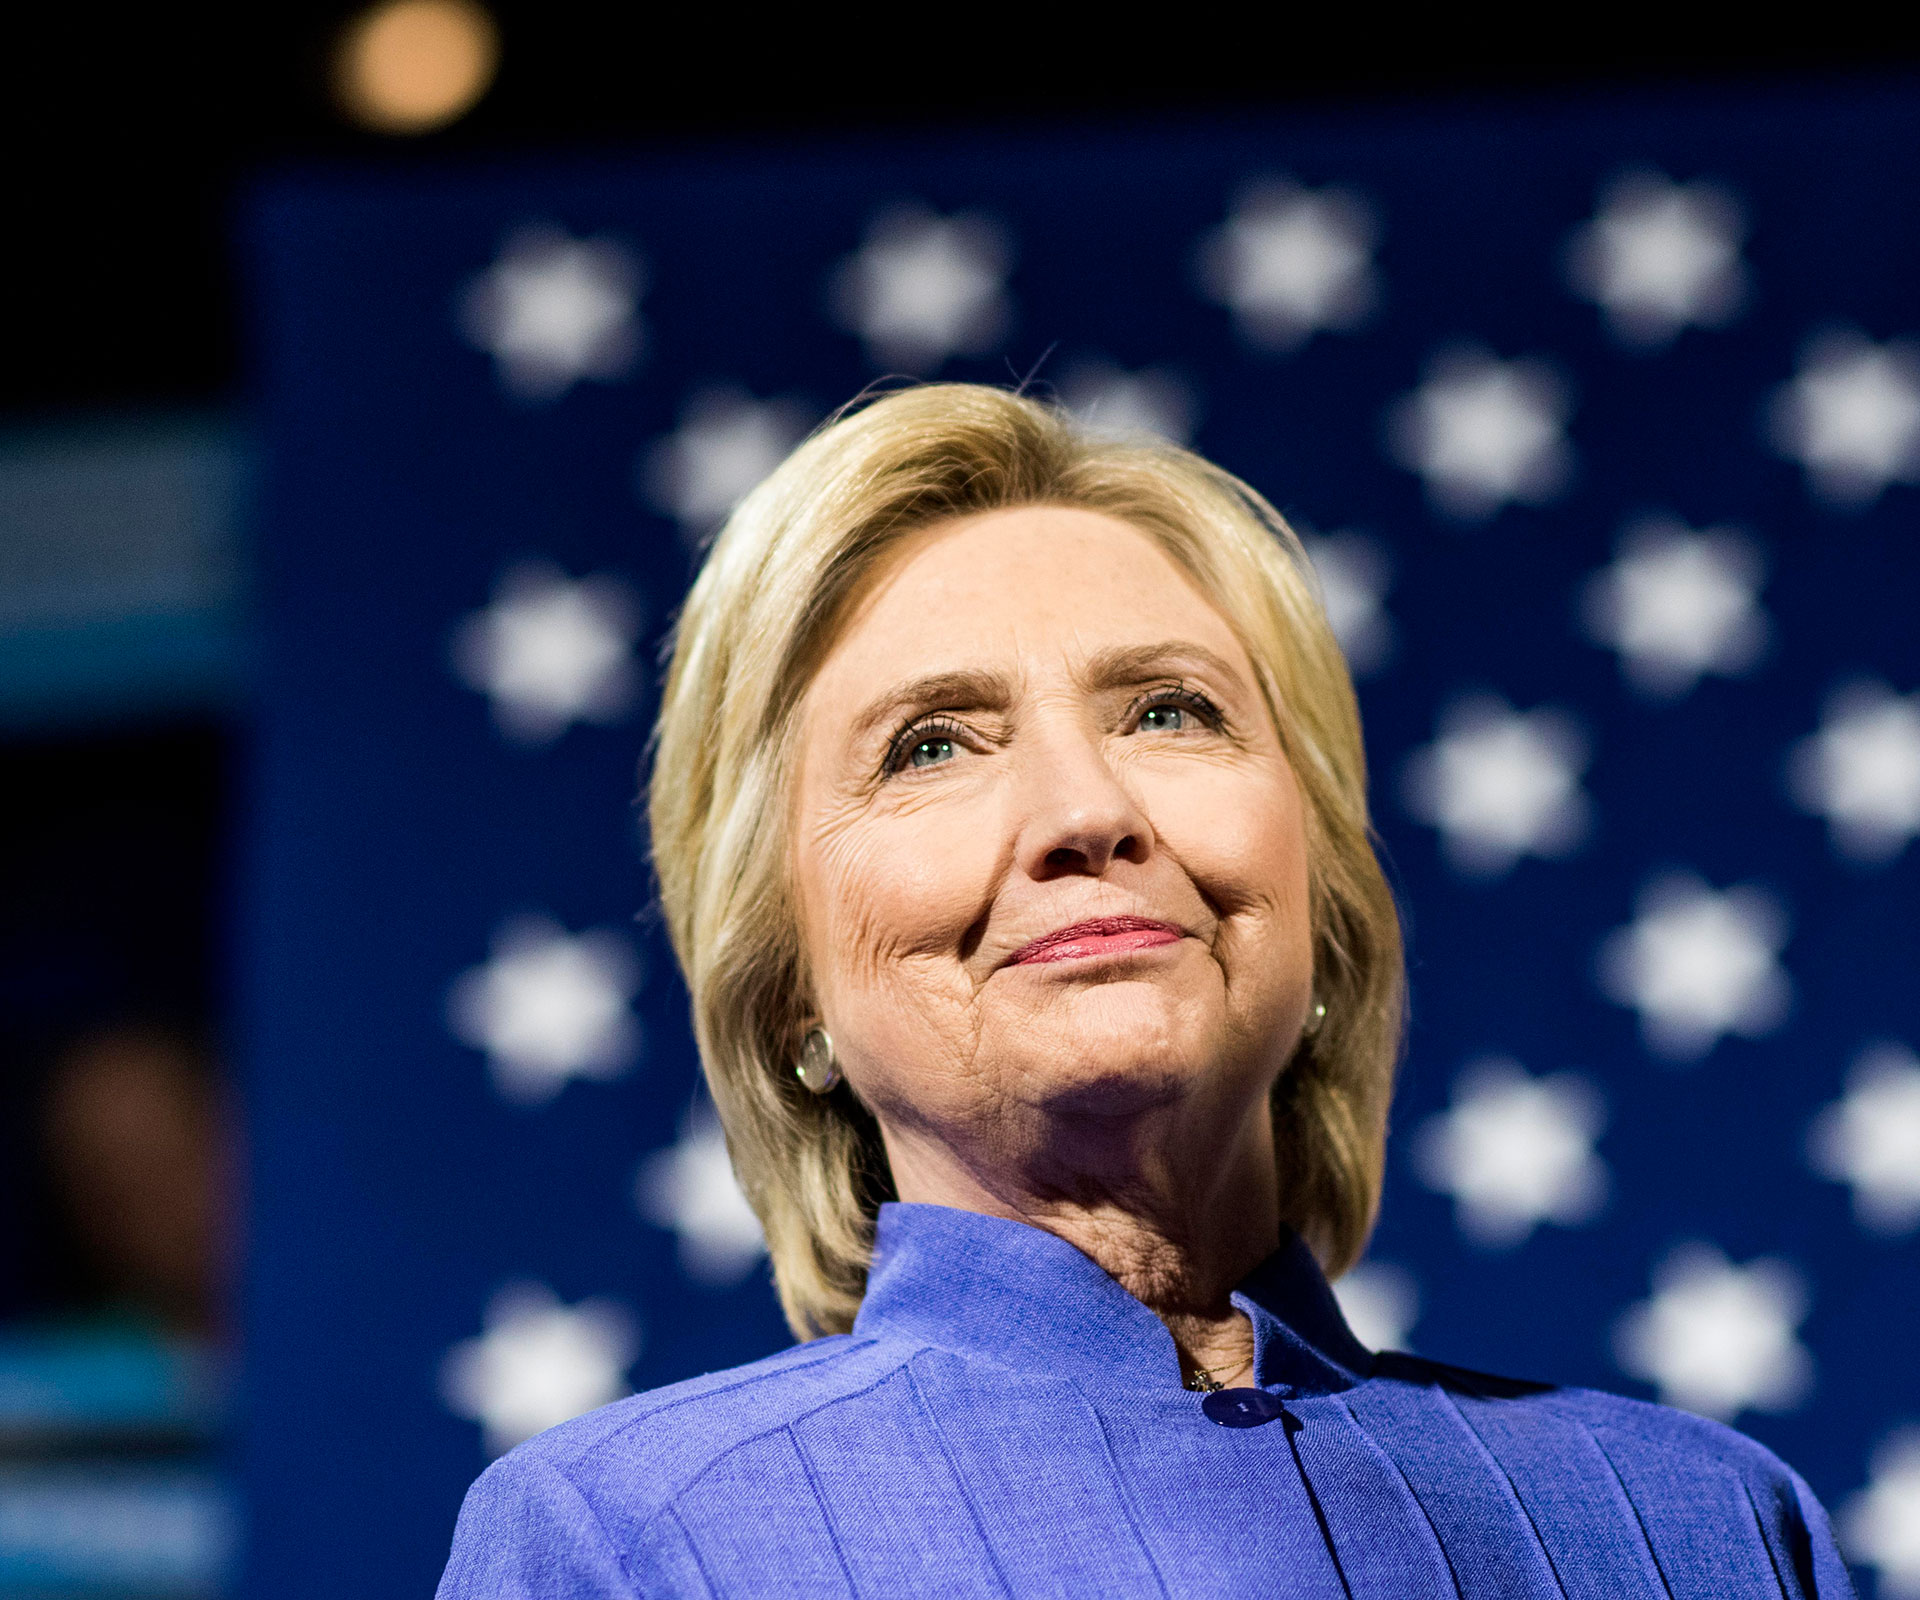 The Democratic Party is with her: Hillary Rodham Clinton makes history